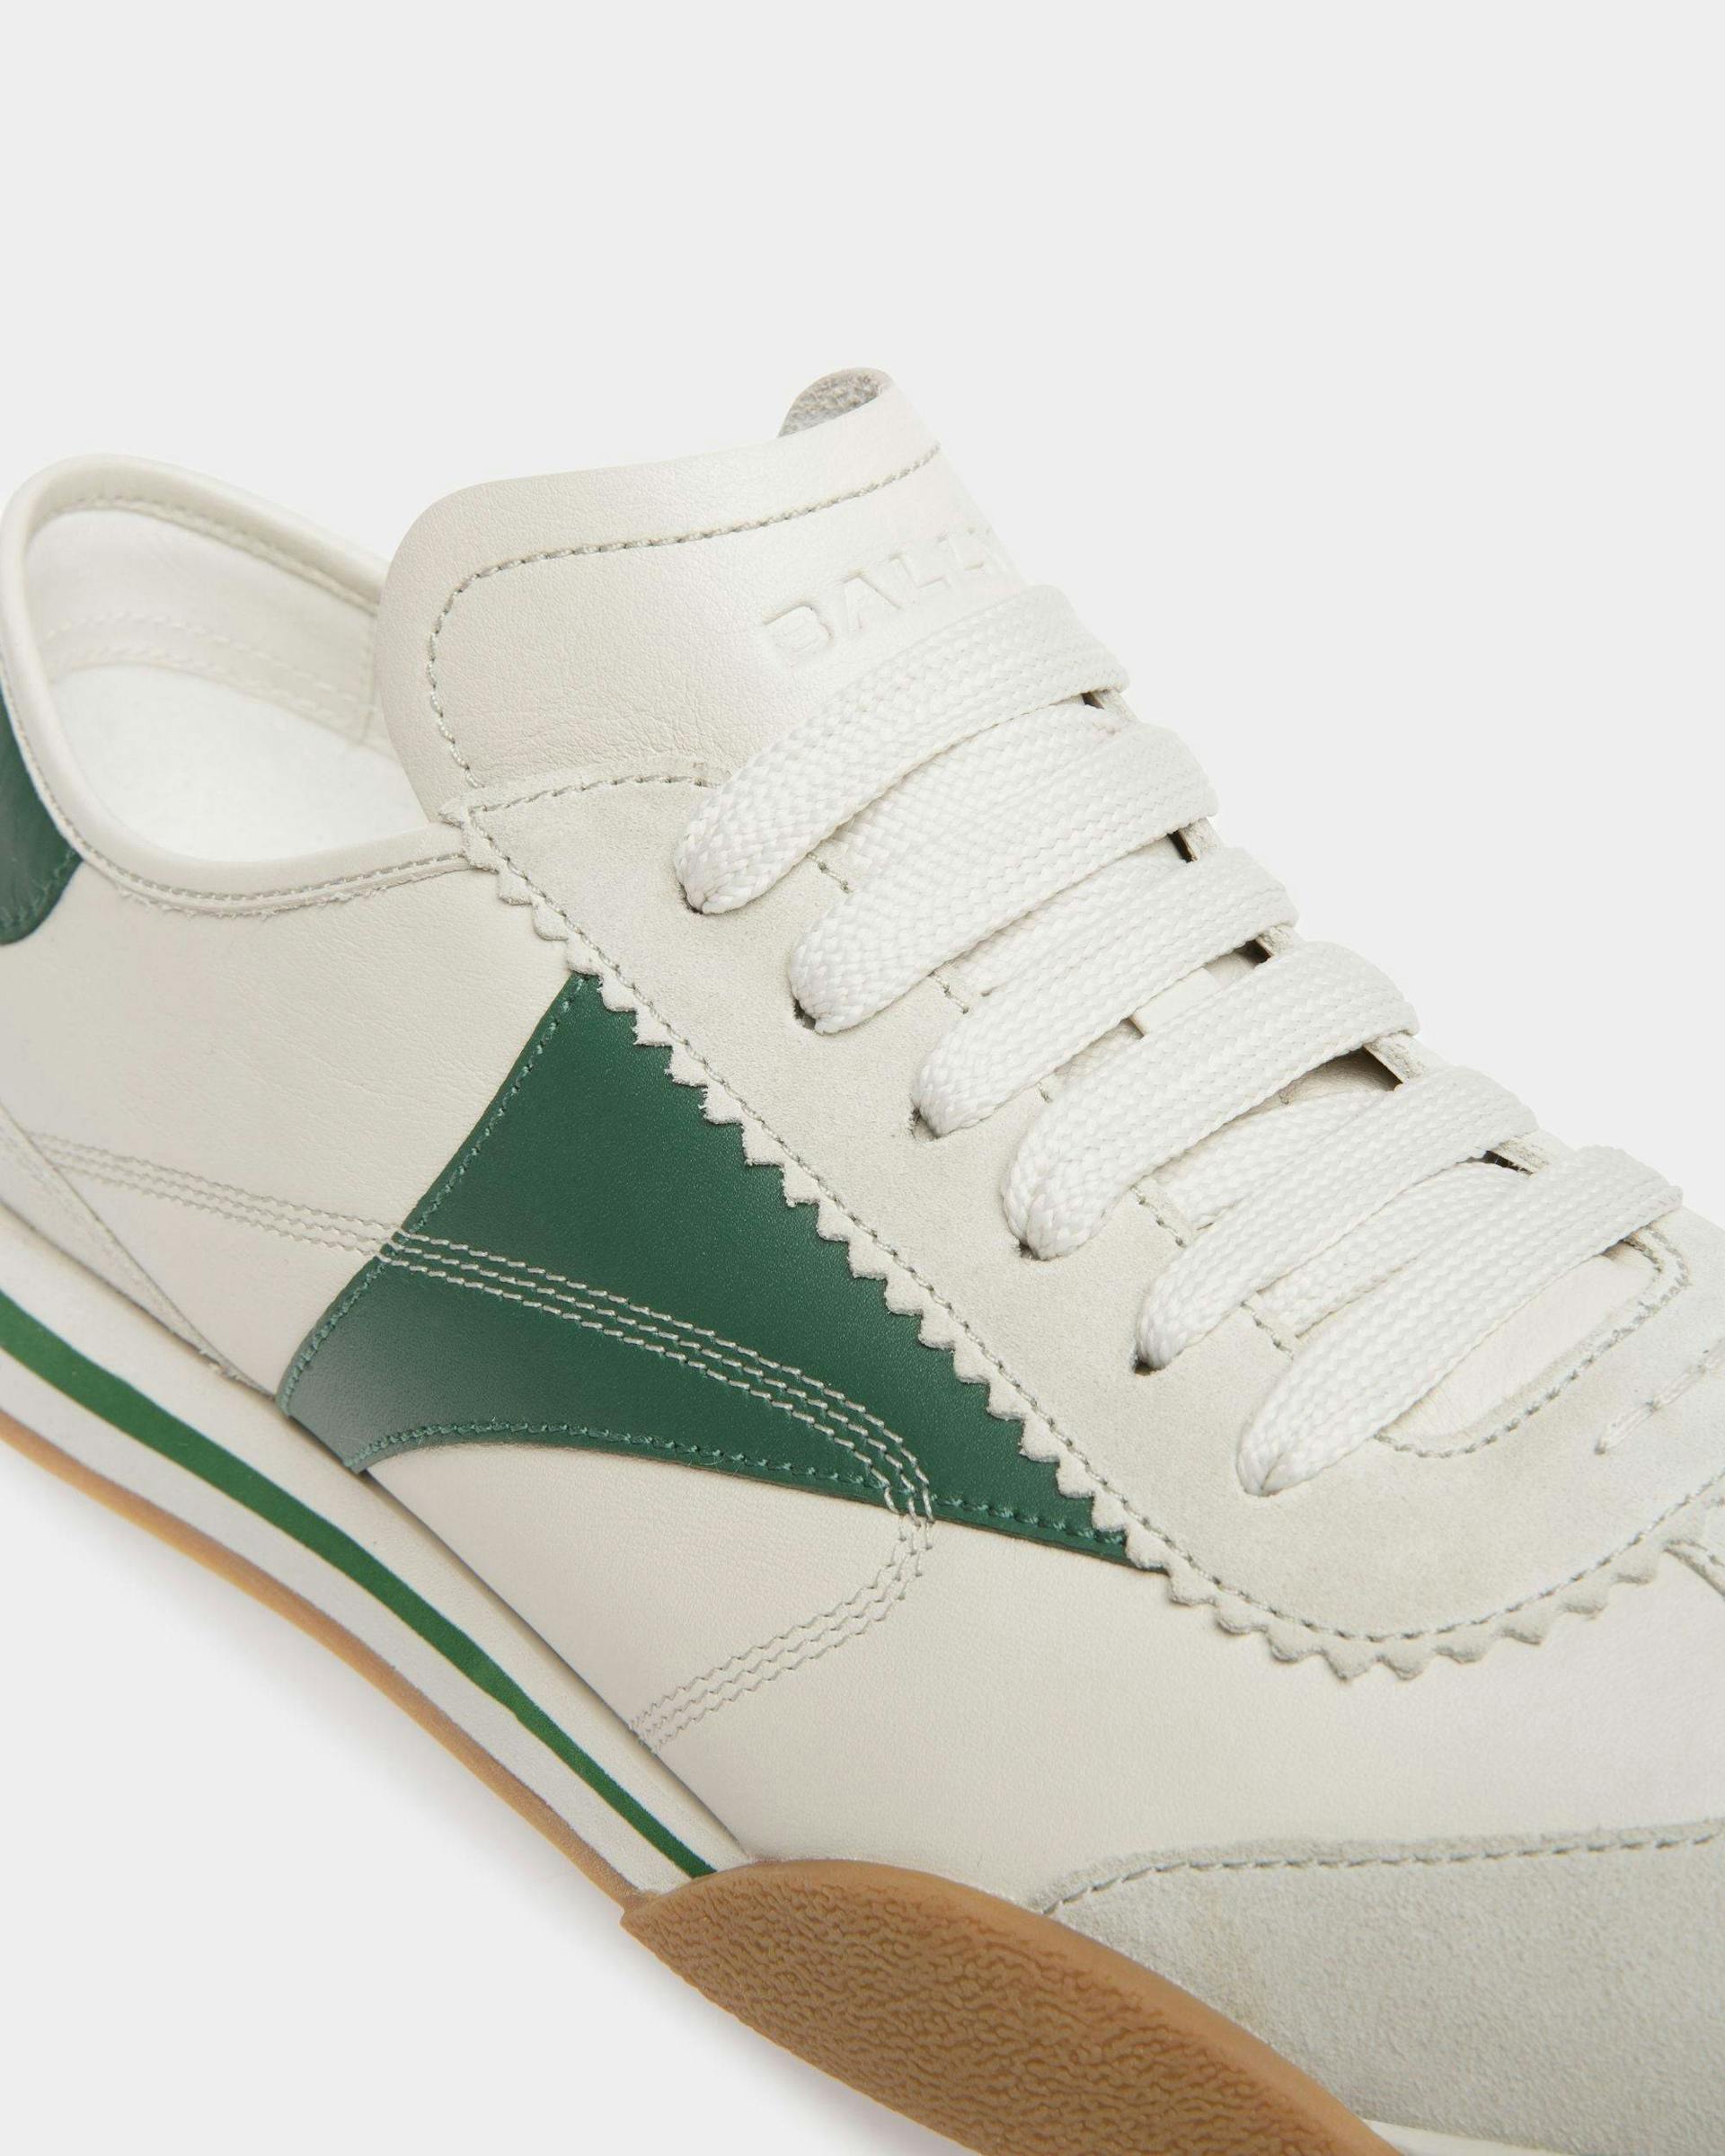 Sussex Sneakers In Dusty White And Kelly Green Leather - Men's - Bally - 06